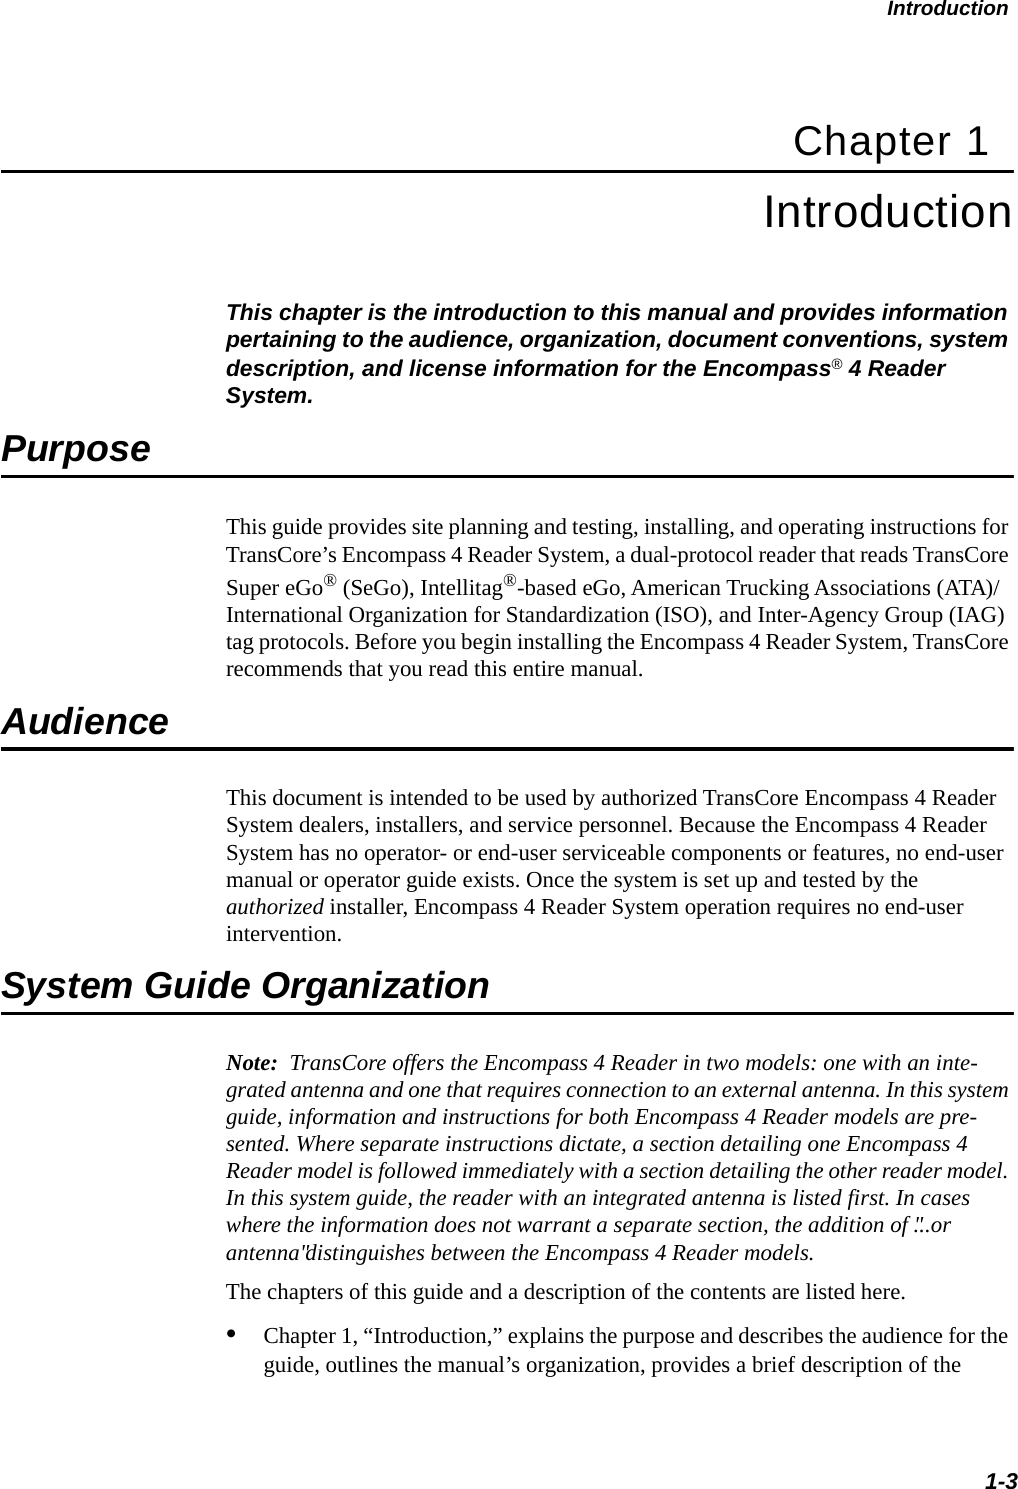 Introduction1-3Chapter 1Introduction This chapter is the introduction to this manual and provides information pertaining to the audience, organization, document conventions, system description, and license information for the Encompass® 4 Reader System. PurposeThis guide provides site planning and testing, installing, and operating instructions for TransCore’s Encompass 4 Reader System, a dual-protocol reader that reads TransCore Super eGo® (SeGo), Intellitag®-based eGo, American Trucking Associations (ATA)/International Organization for Standardization (ISO), and Inter-Agency Group (IAG) tag protocols. Before you begin installing the Encompass 4 Reader System, TransCore recommends that you read this entire manual.AudienceThis document is intended to be used by authorized TransCore Encompass 4 Reader System dealers, installers, and service personnel. Because the Encompass 4 Reader System has no operator- or end-user serviceable components or features, no end-user manual or operator guide exists. Once the system is set up and tested by the authorized installer, Encompass 4 Reader System operation requires no end-user intervention.System Guide OrganizationNote:  TransCore offers the Encompass 4 Reader in two models: one with an inte-grated antenna and one that requires connection to an external antenna. In this system guide, information and instructions for both Encompass 4 Reader models are pre-sented. Where separate instructions dictate, a section detailing one Encompass 4 Reader model is followed immediately with a section detailing the other reader model. In this system guide, the reader with an integrated antenna is listed first. In cases where the information does not warrant a separate section, the addition of &quot;...or antenna&quot; distinguishes between the Encompass 4 Reader models.The chapters of this guide and a description of the contents are listed here. •Chapter 1, “Introduction,” explains the purpose and describes the audience for theguide, outlines the manual’s organization, provides a brief description of the